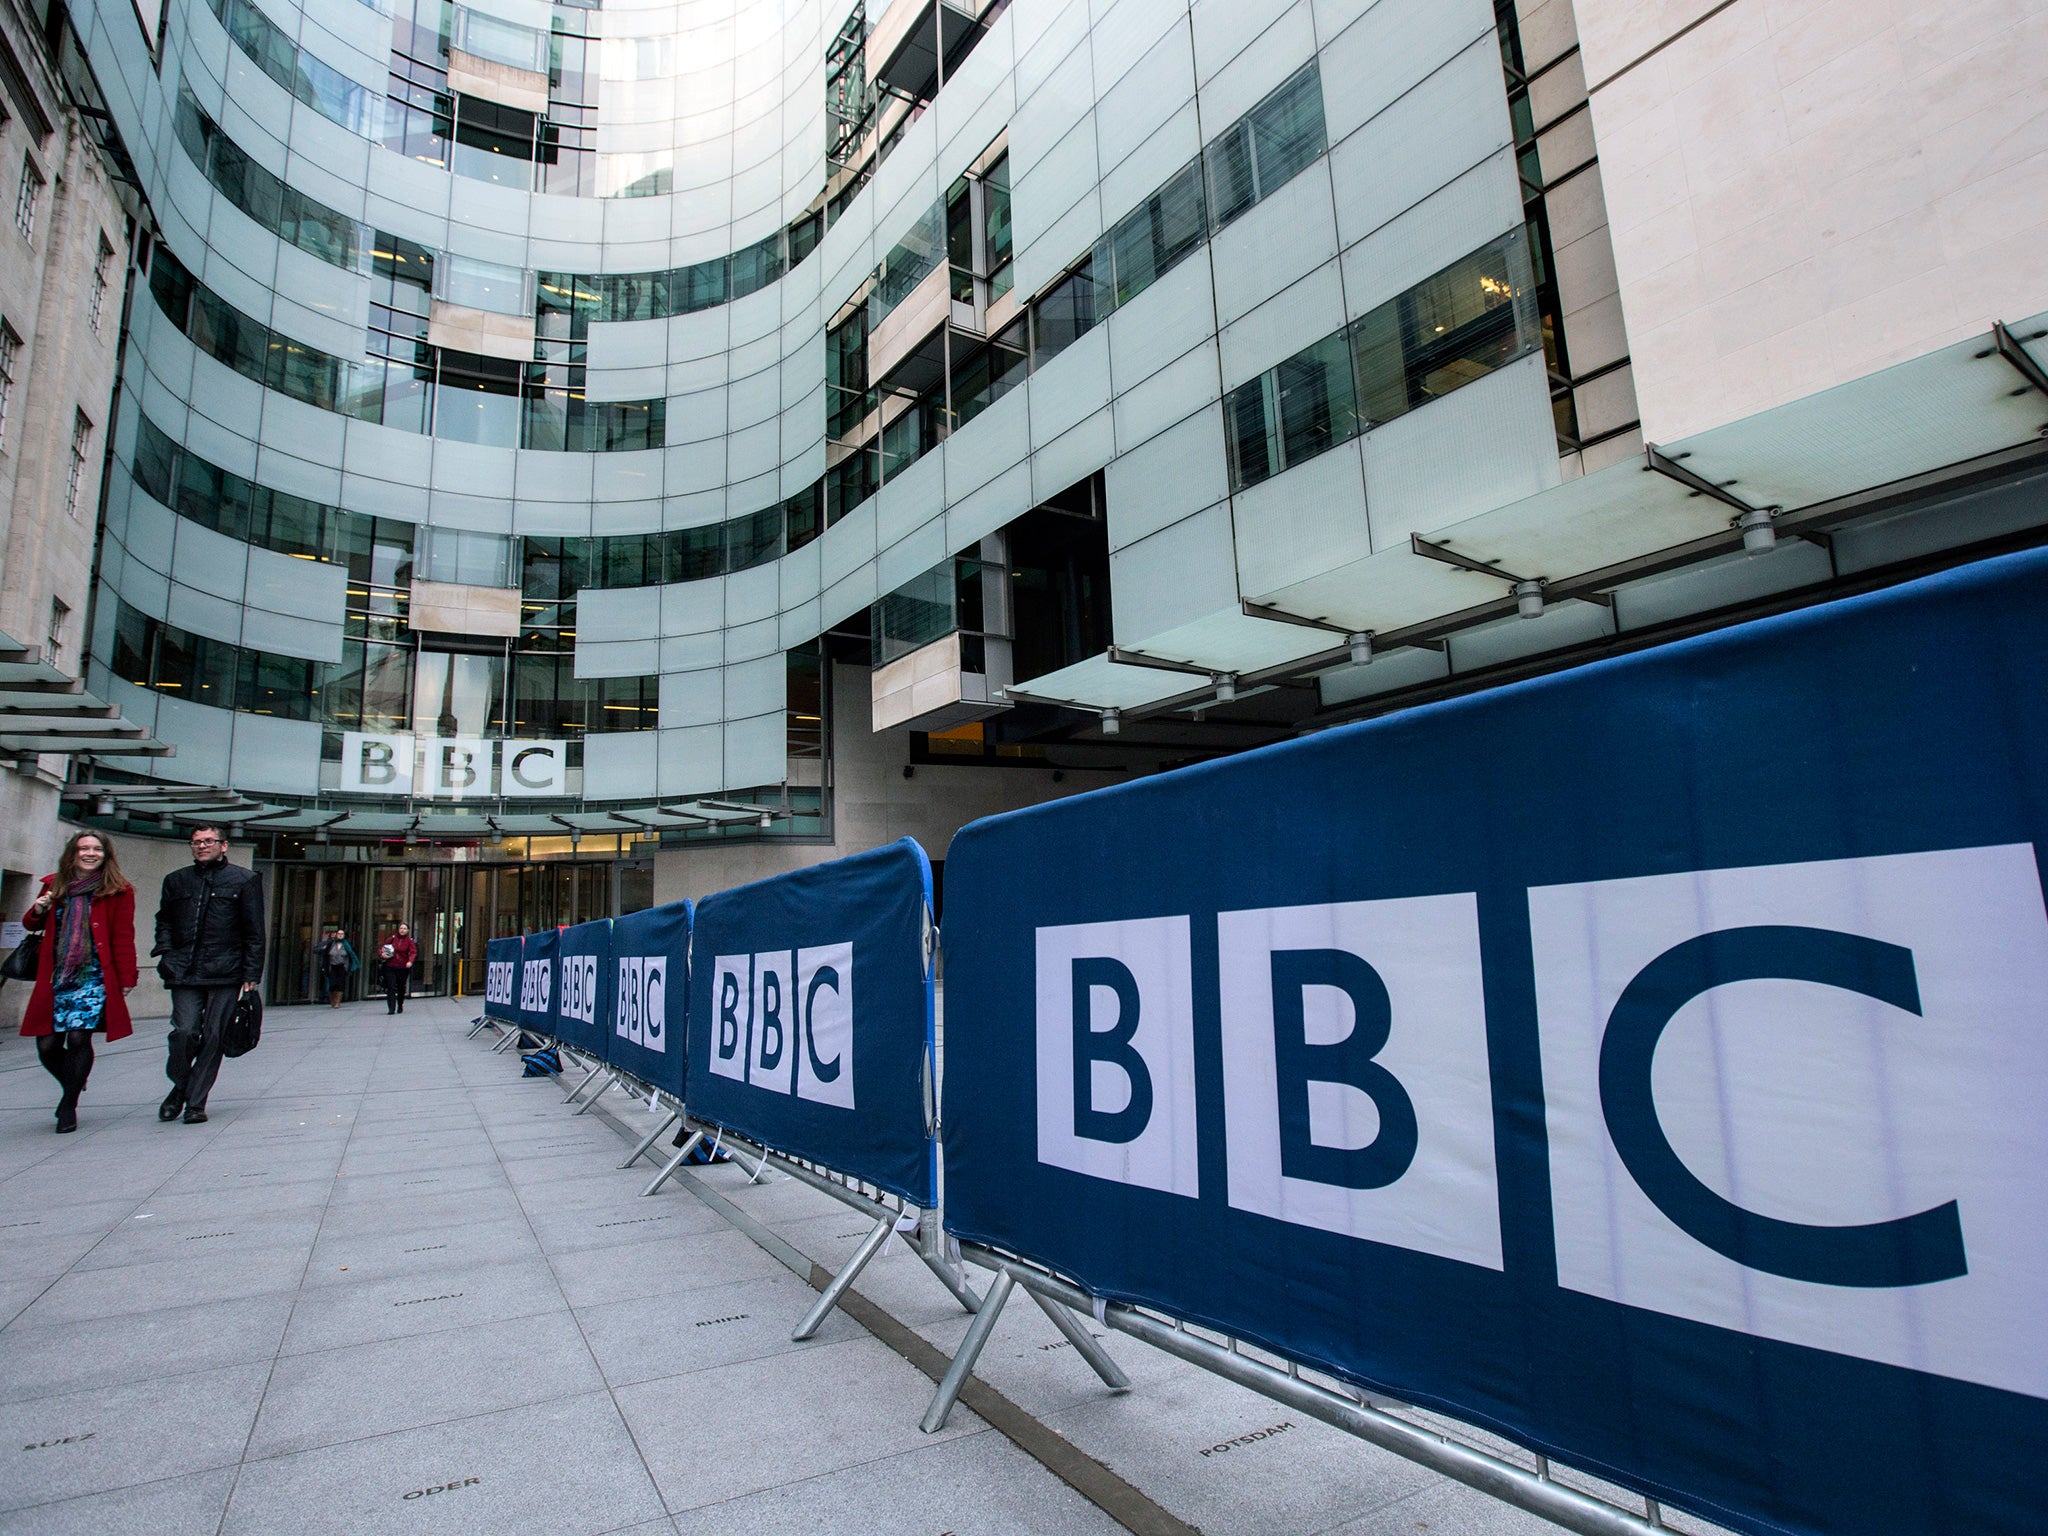 George Osborne has indicated his support for Ofcom taking over the governance of the BBC